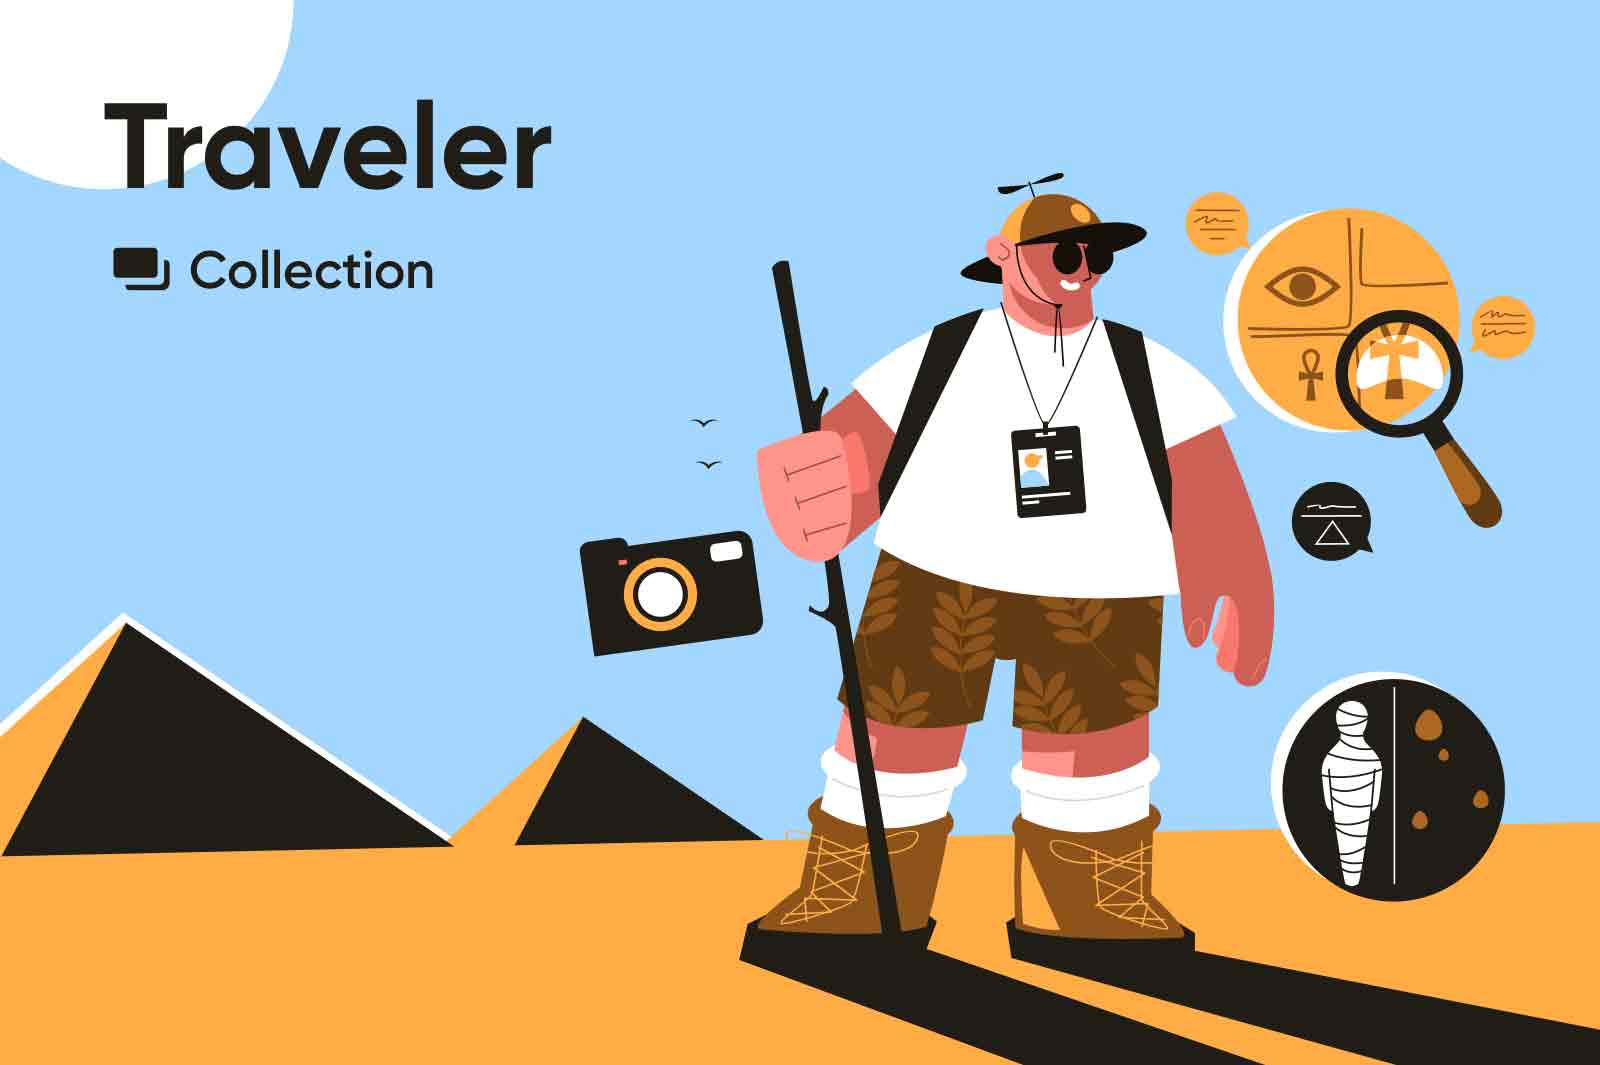 Story of traveling to interesting places. Vecyot character illustrations.